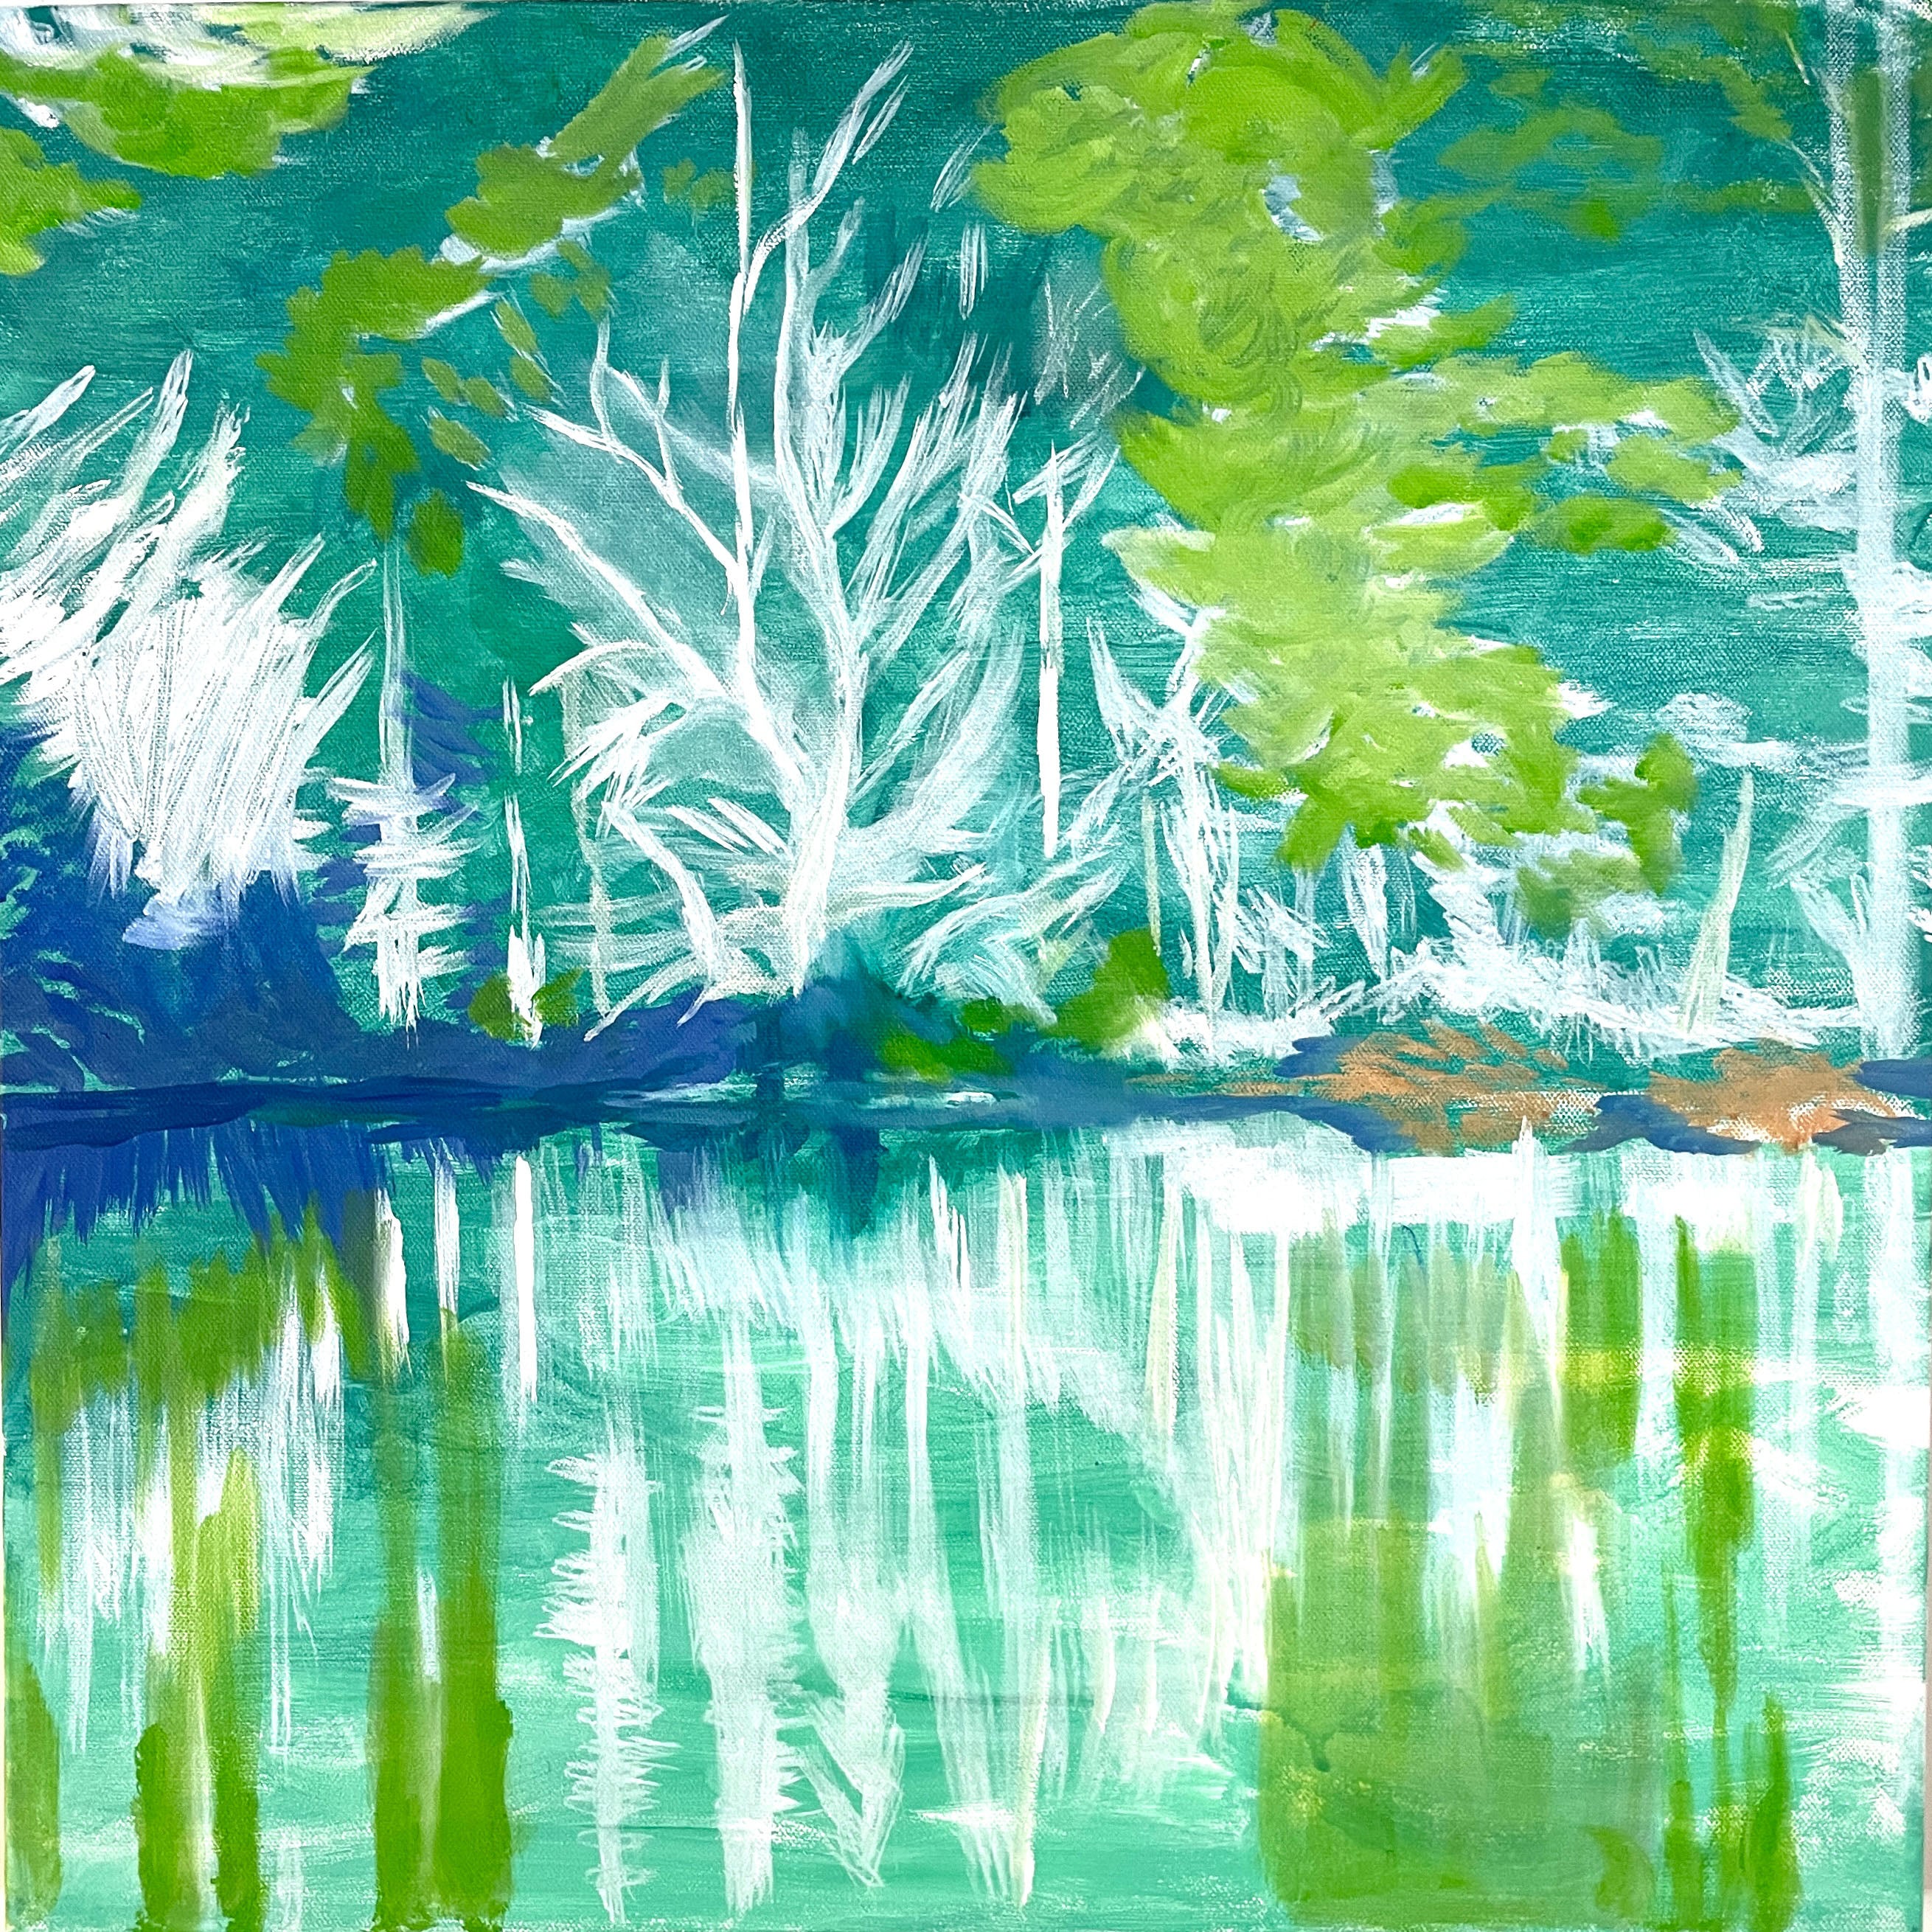 'HATHAWAY POND' - Oil and Acrylic on canvas